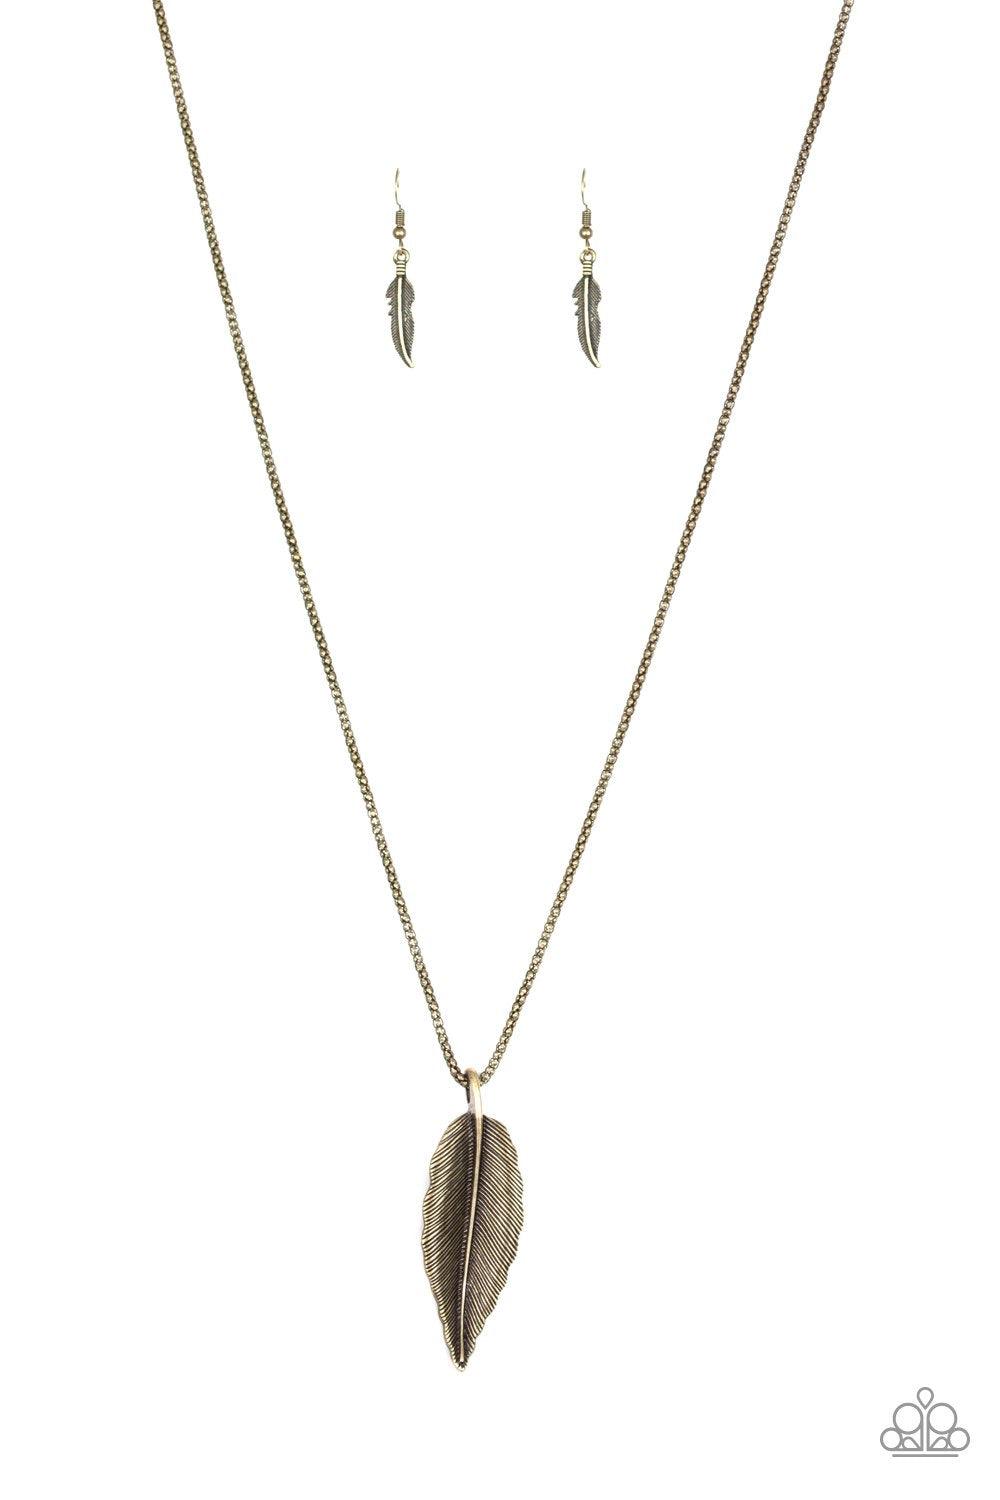 Paparazzi Accessories Feather Forager - Brass Featuring lifelike textures, a glistening brass feather pendant swings from the bottom of a lengthened brass popcorn chain for a seasonal look. Features an adjustable clasp closure. Jewelry